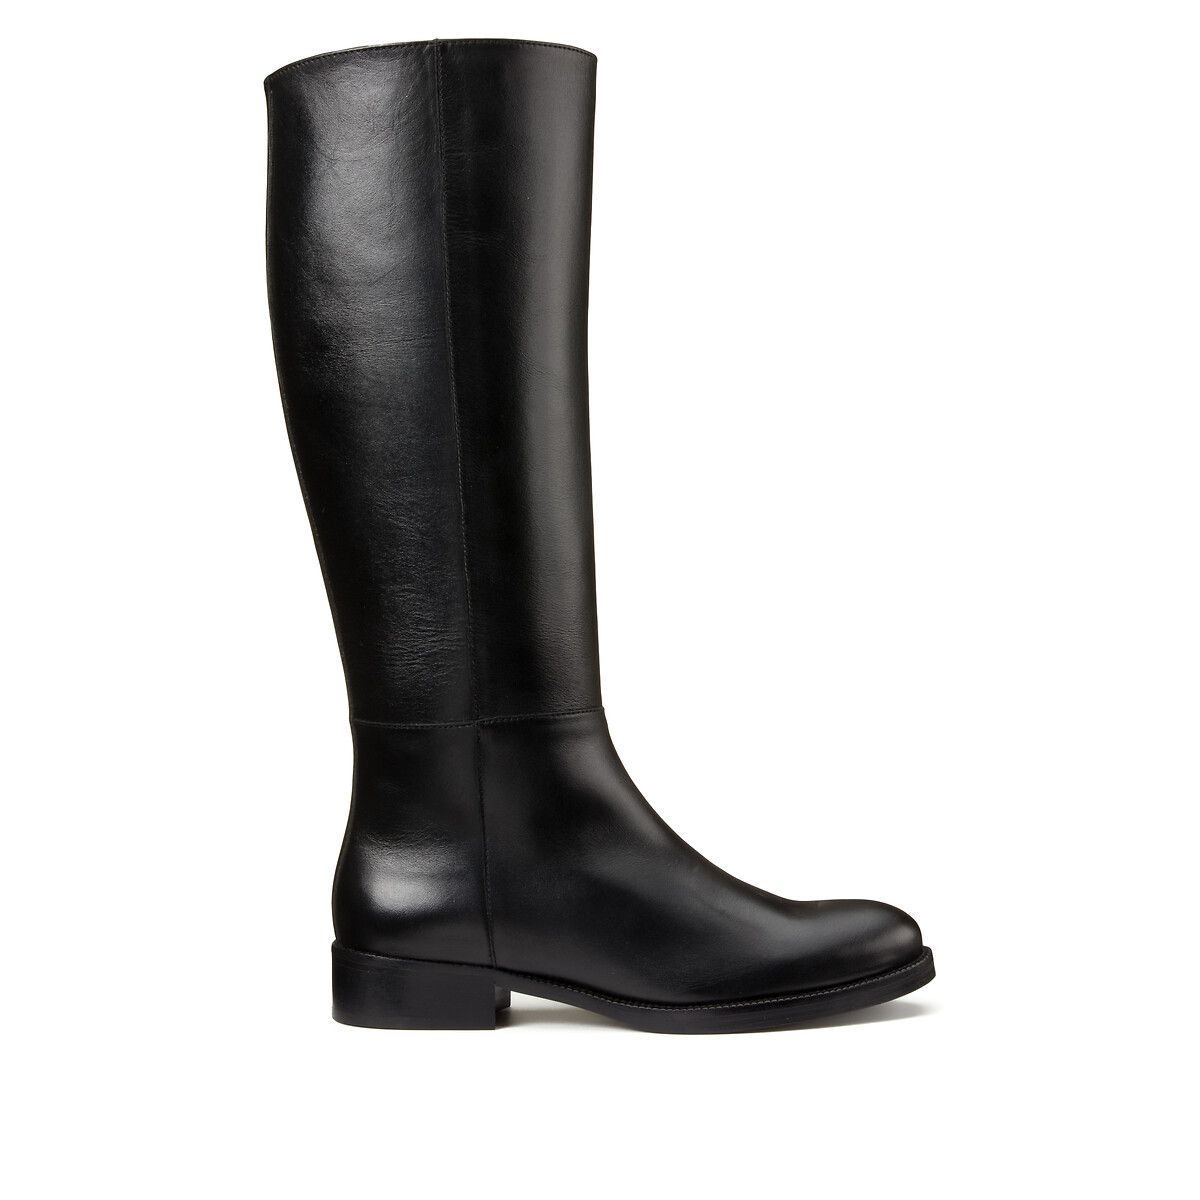 Leather Riding Boots | La Redoute (UK)